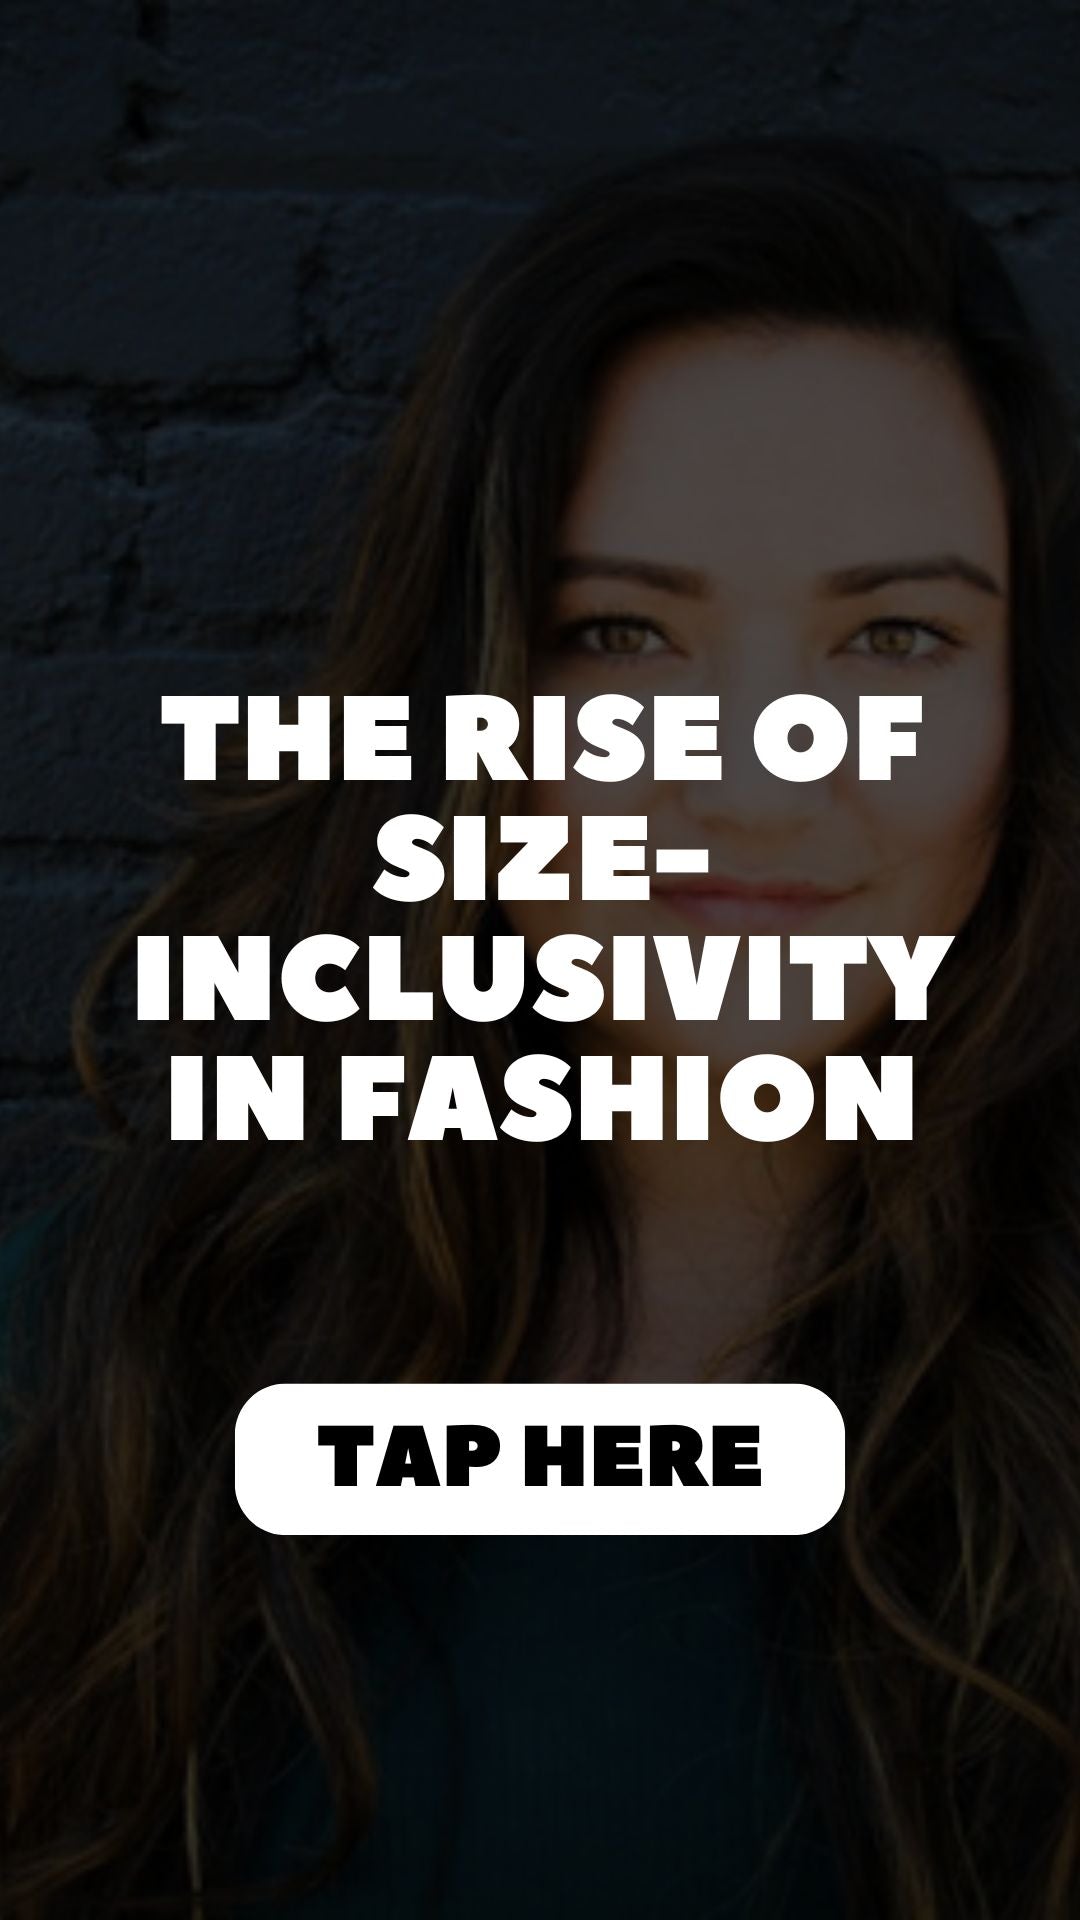 The Rise of Size-Inclusivity in Fashion